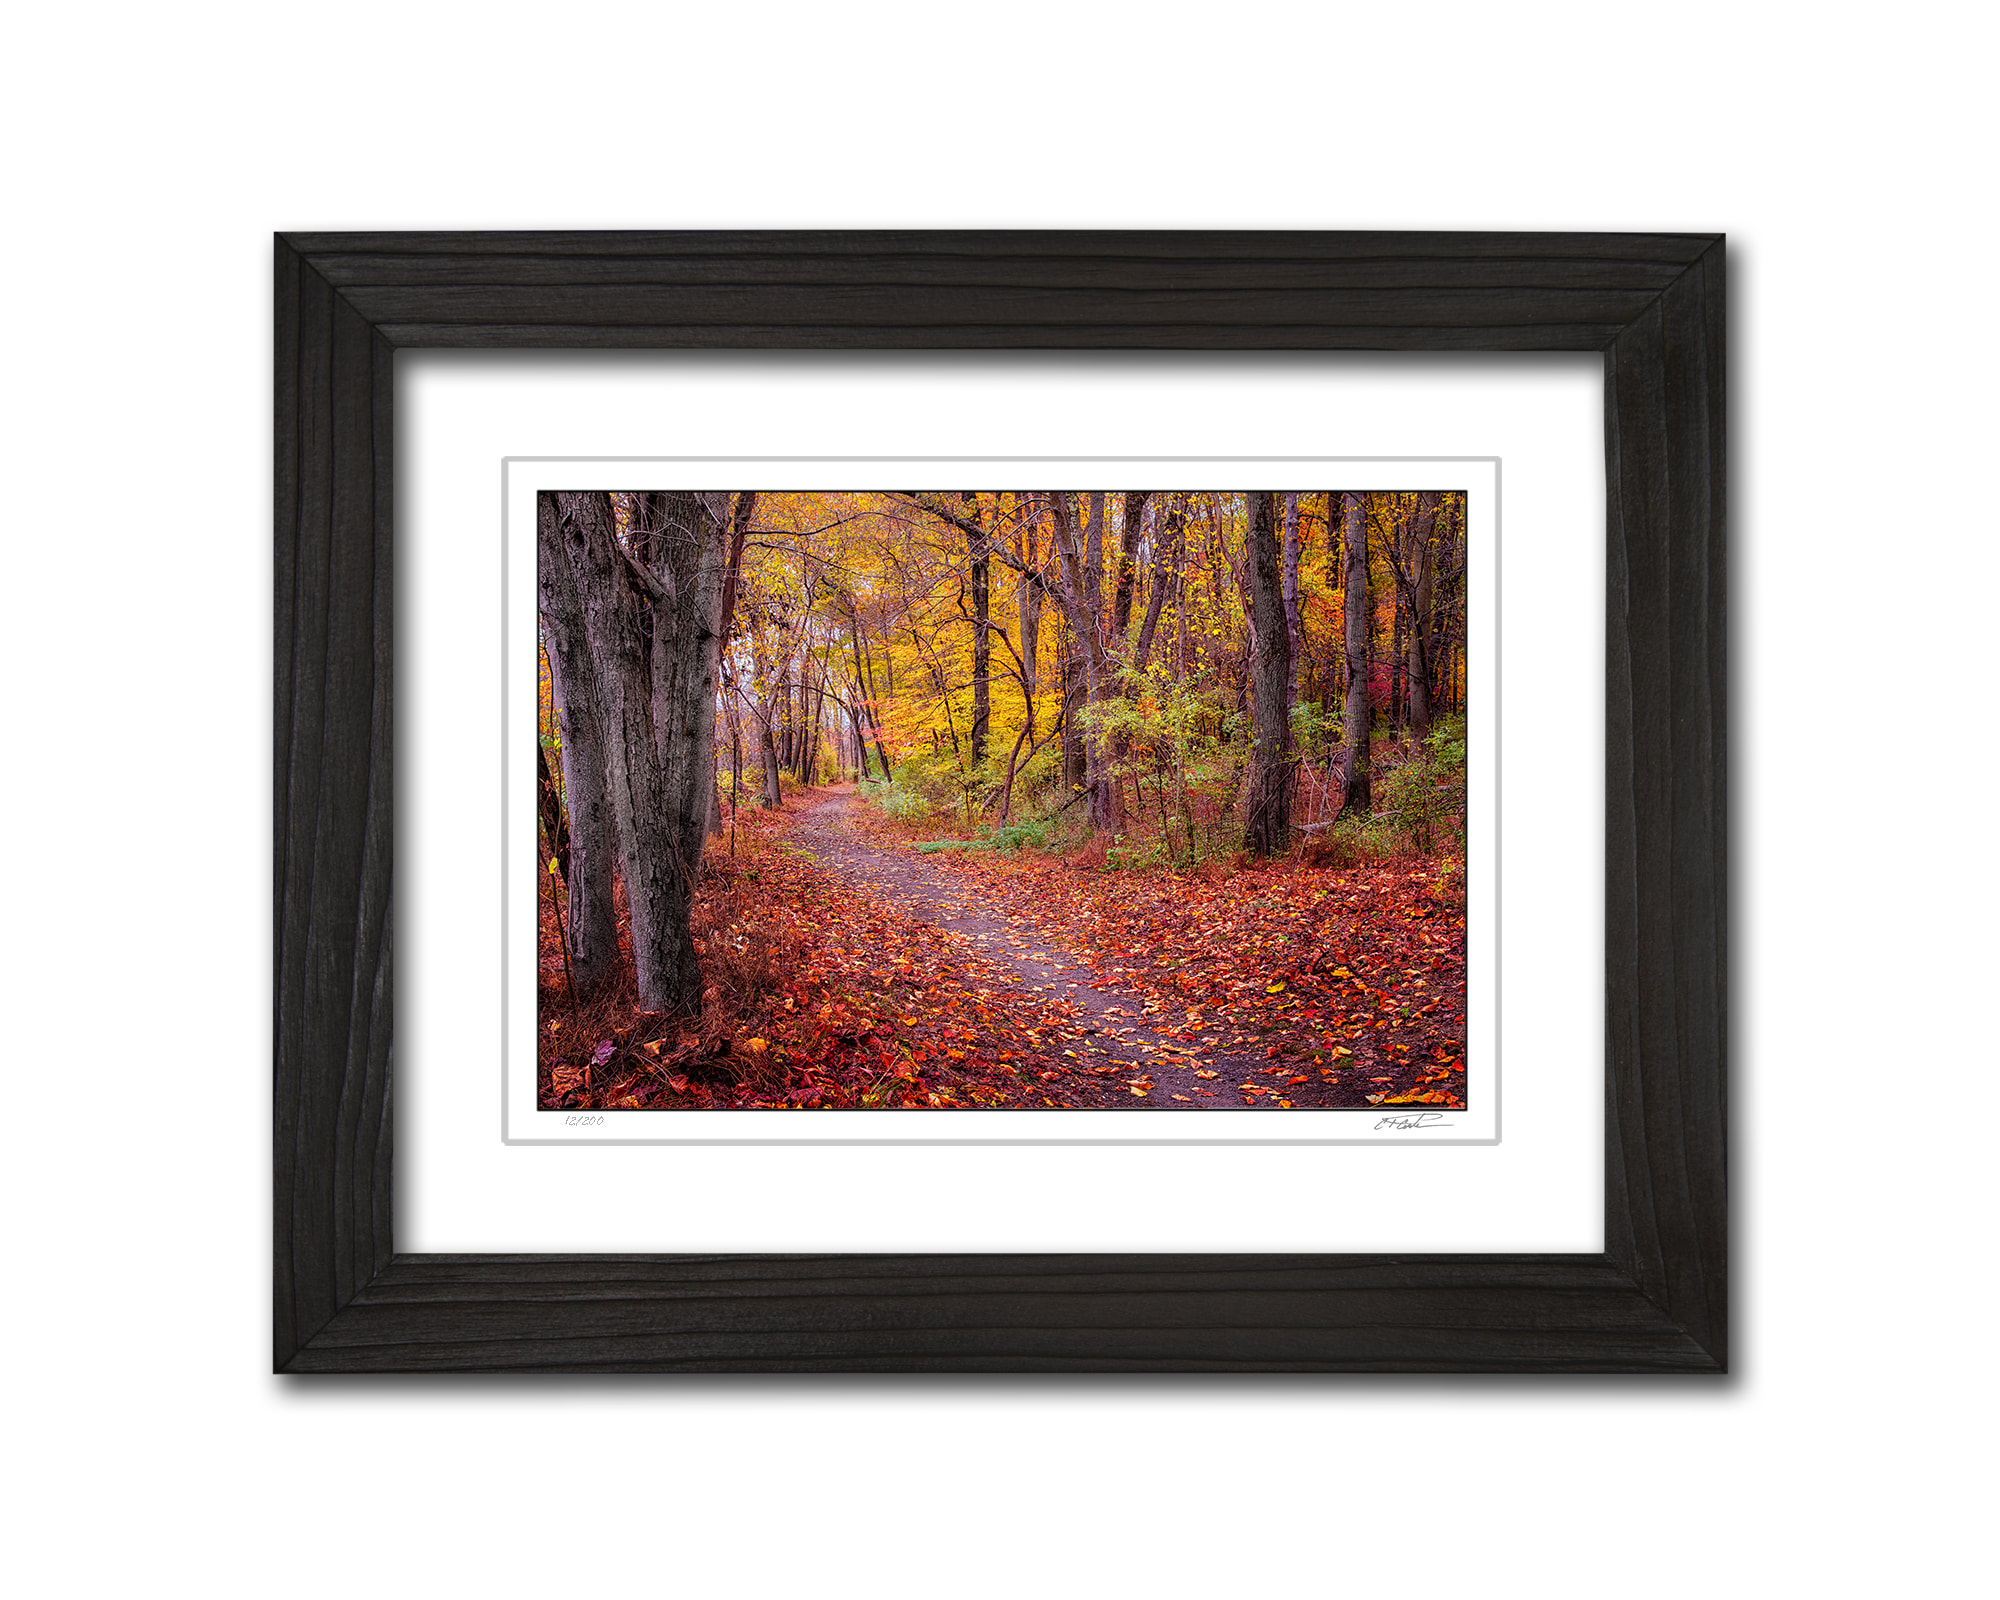 Framed Valley Forge Autumn Path, Photography by C.T. Costa